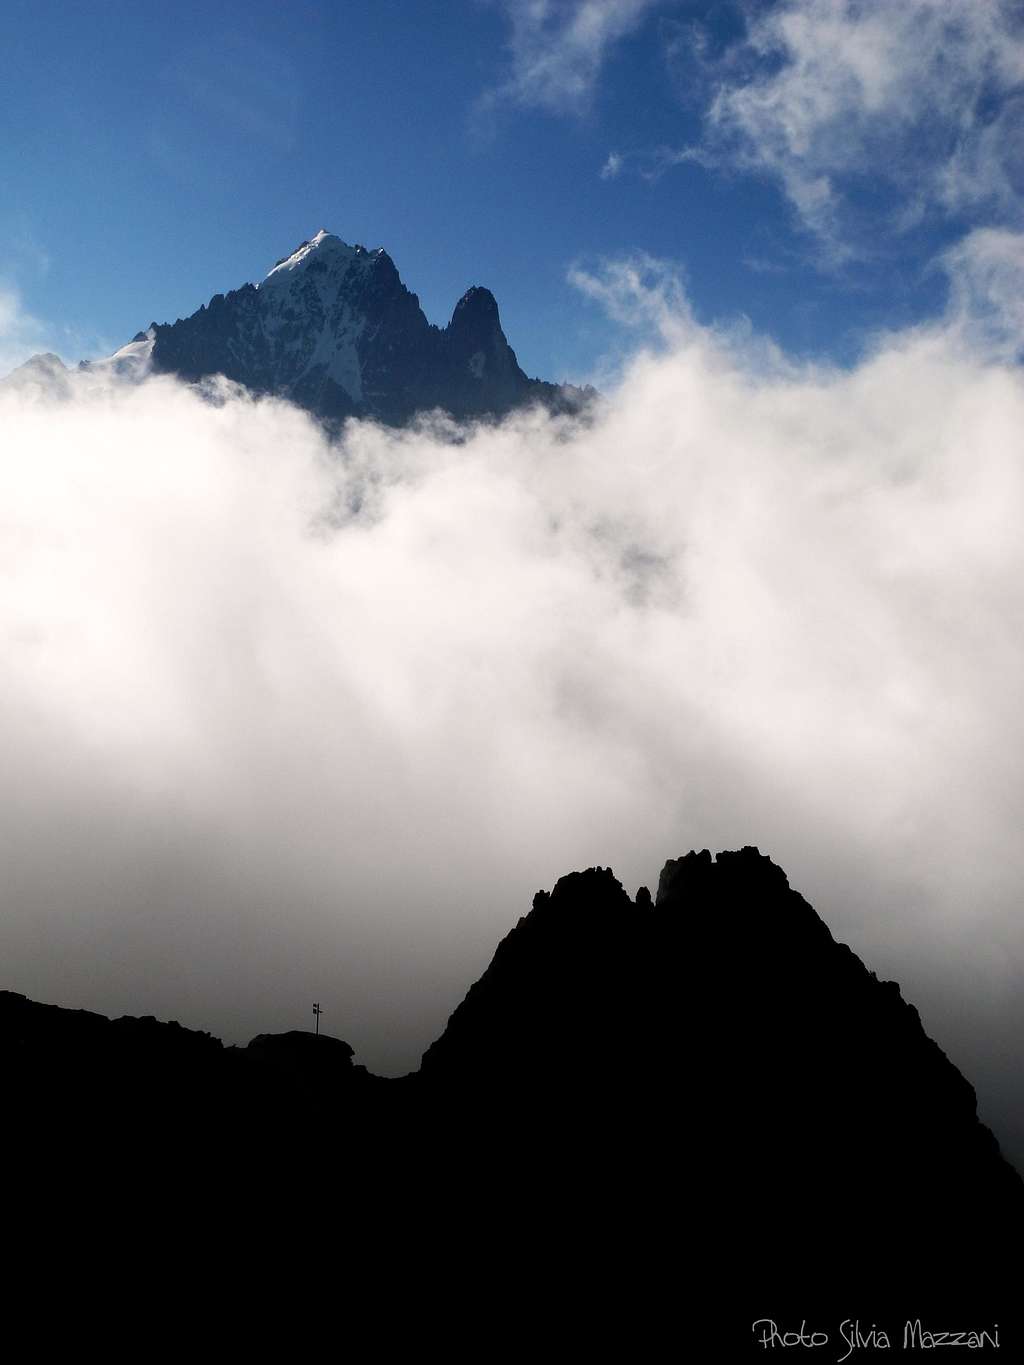 Petit Dru and Aiguille Verte stand out the clouds